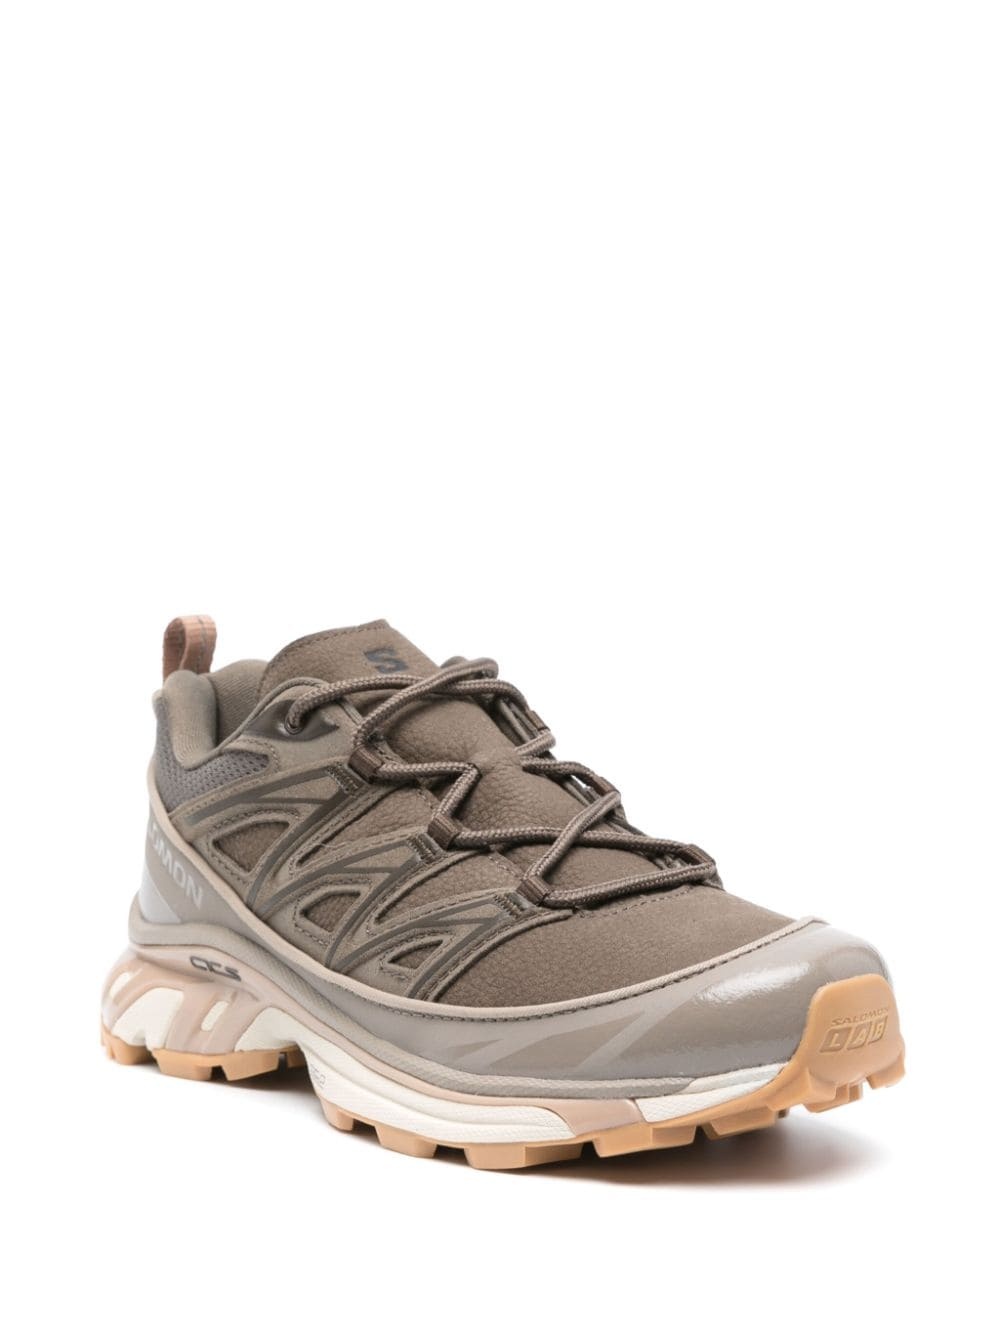 XT-6 Expanse leather sneakers - 2